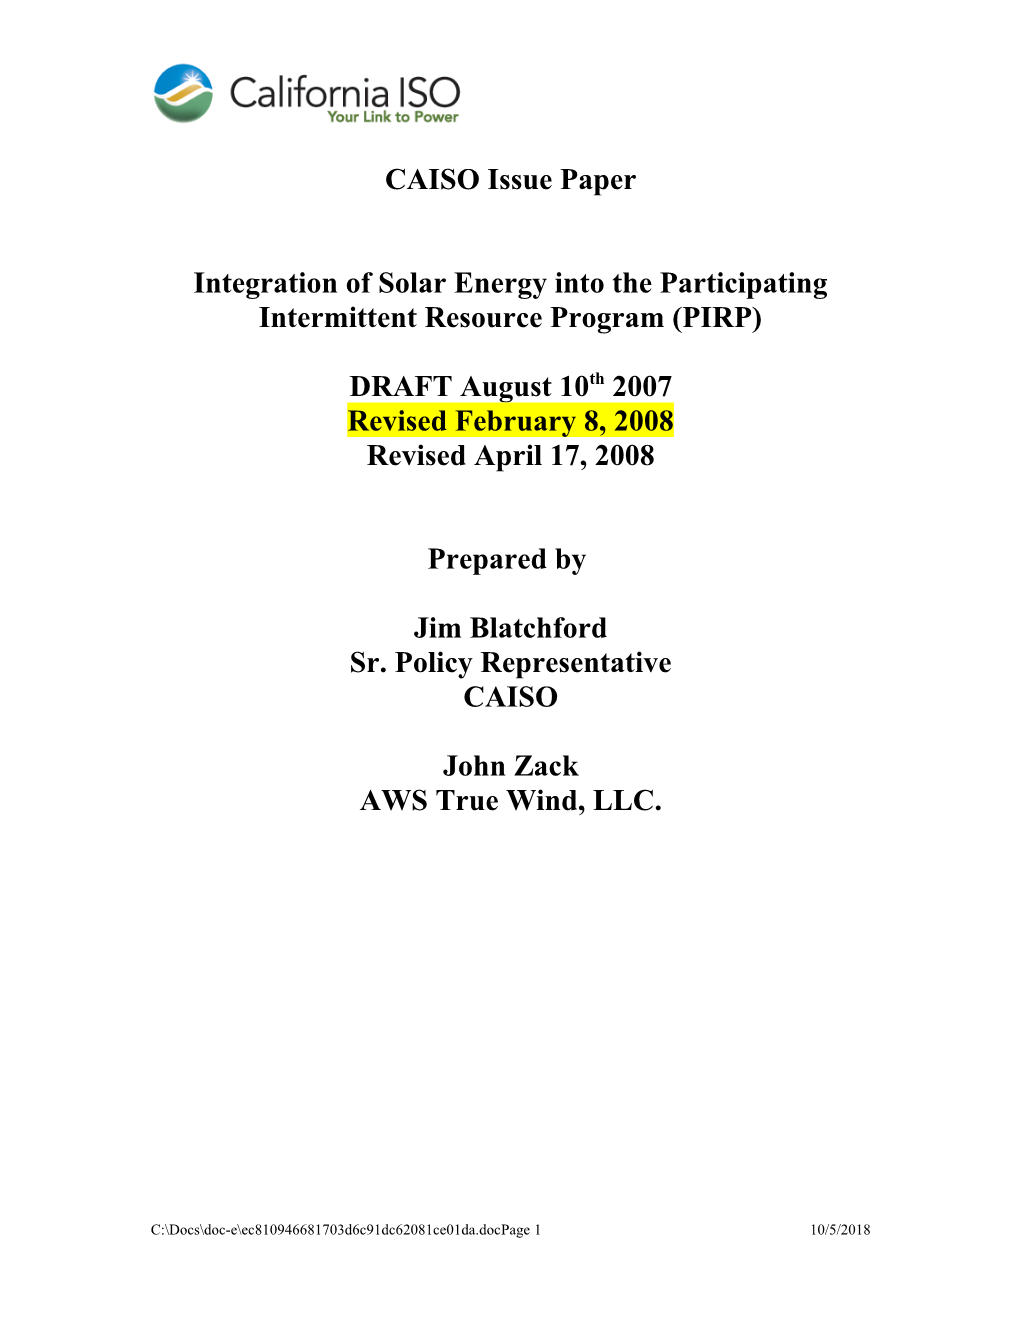 Revised Issue Paper - Integration of Solar Energy Into PIRP 17-Apr-2008